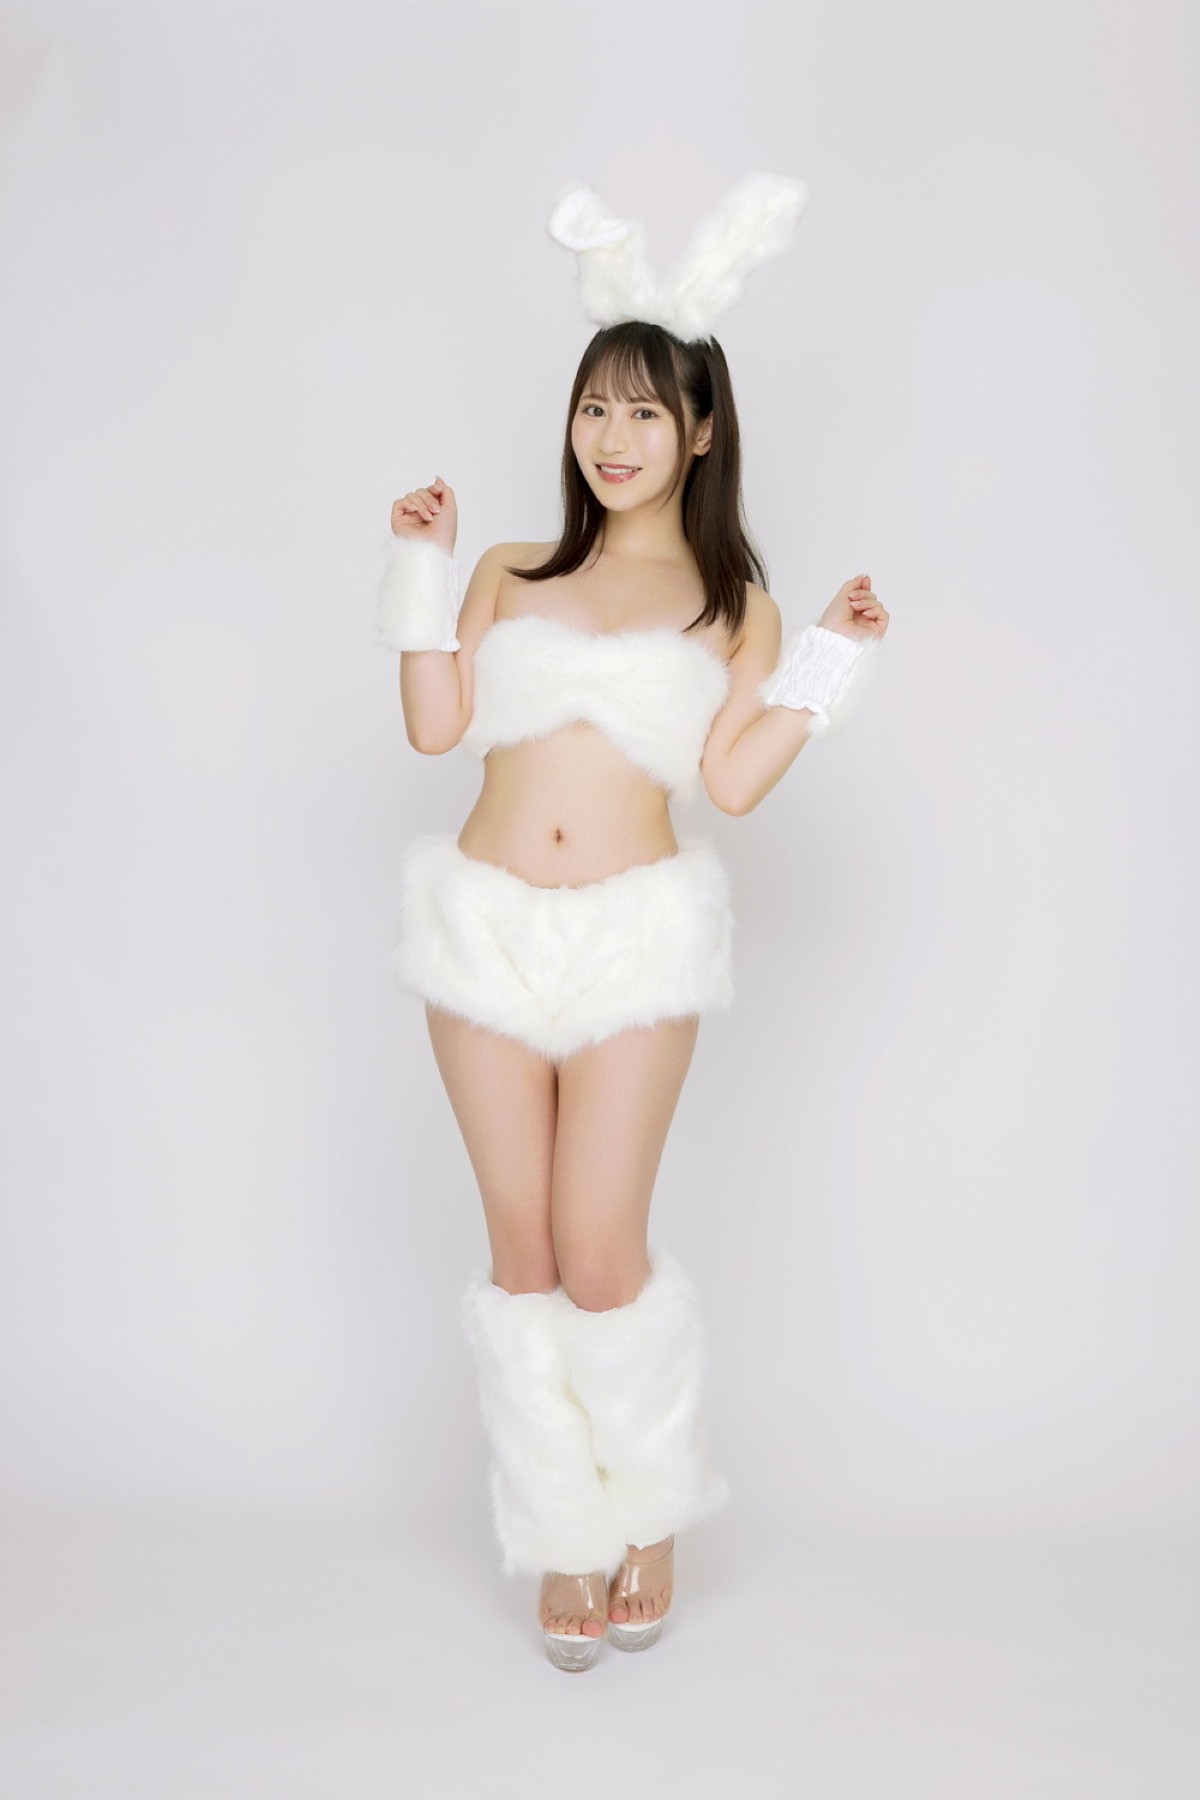 Photobook 2023 01 18 Miru And 5 others New Year Is Eve Super Campaign 2022 2023 Sexy Collection 0005 8969293286.jpg